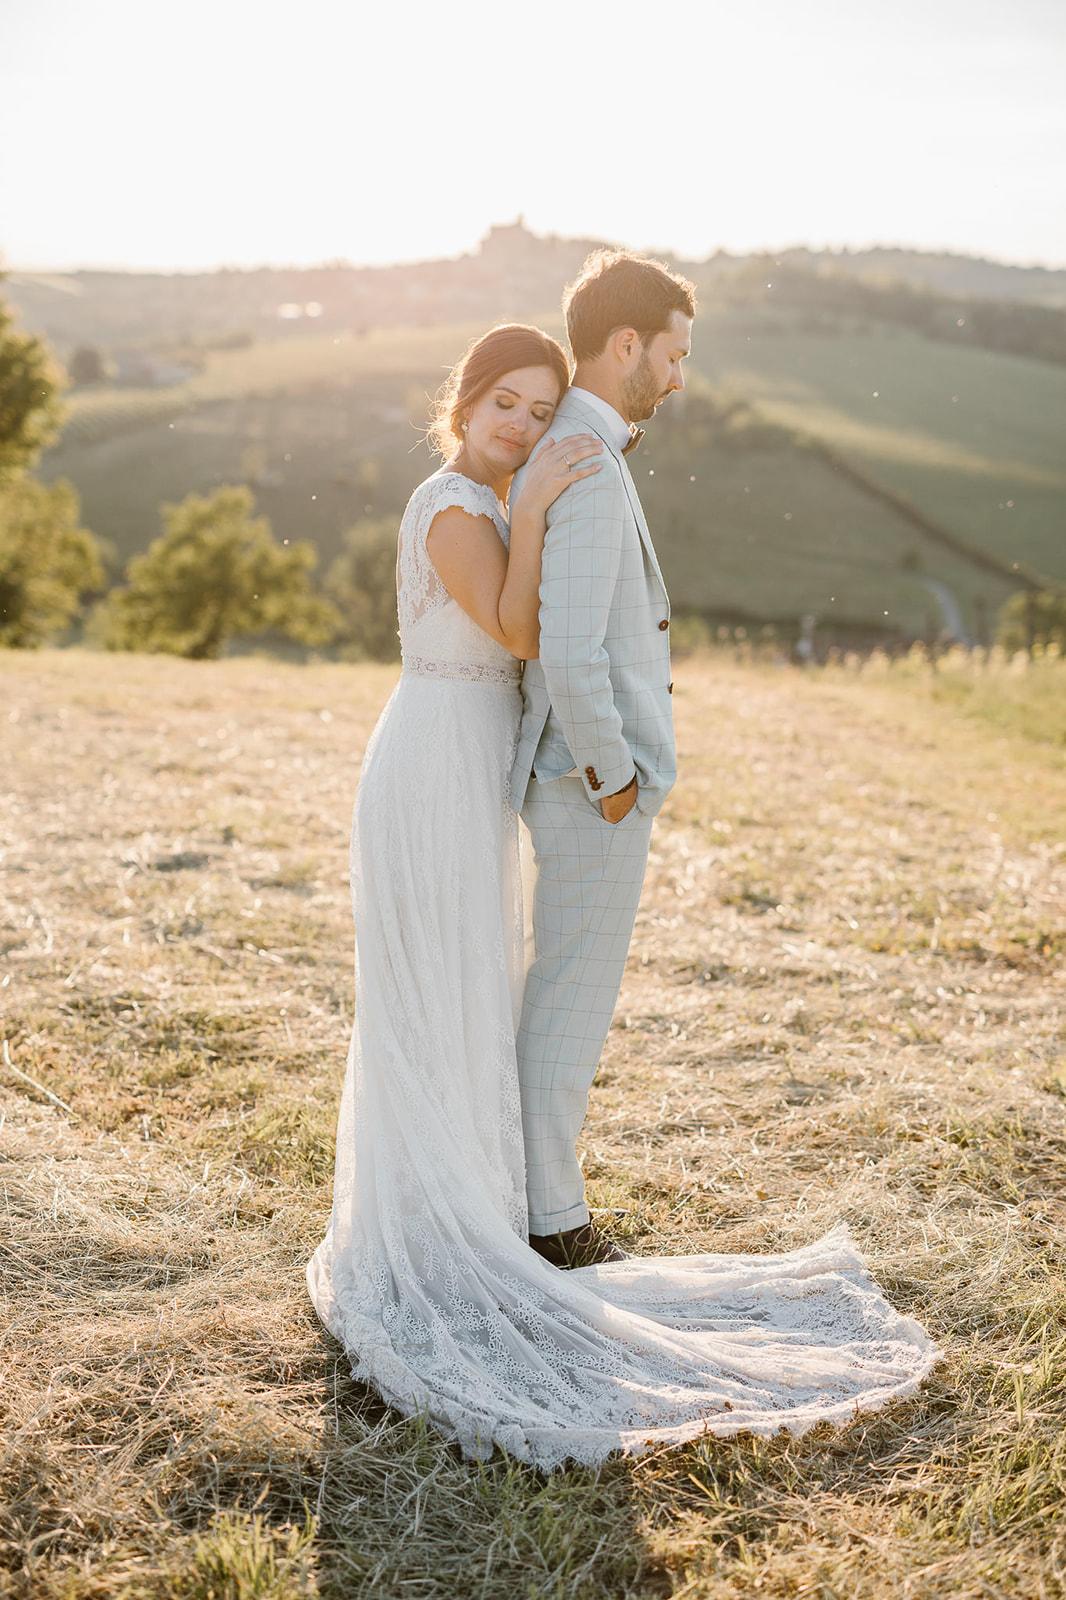 bride and groom in a romantic pose during their wedding photo shoot in the Italian countryside